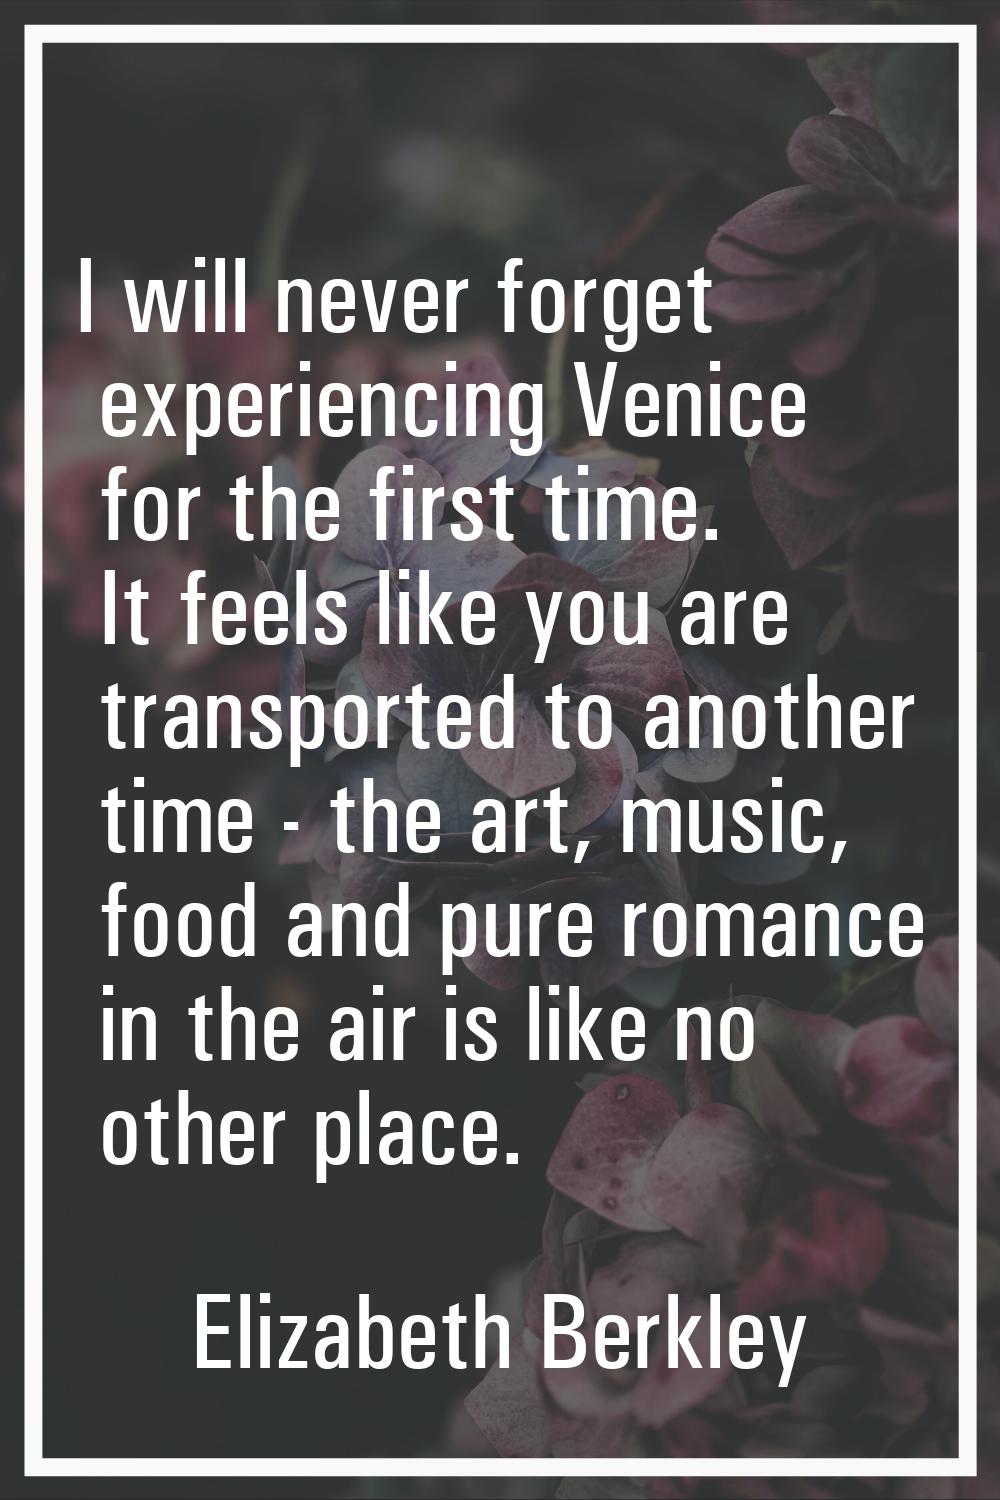 I will never forget experiencing Venice for the first time. It feels like you are transported to an